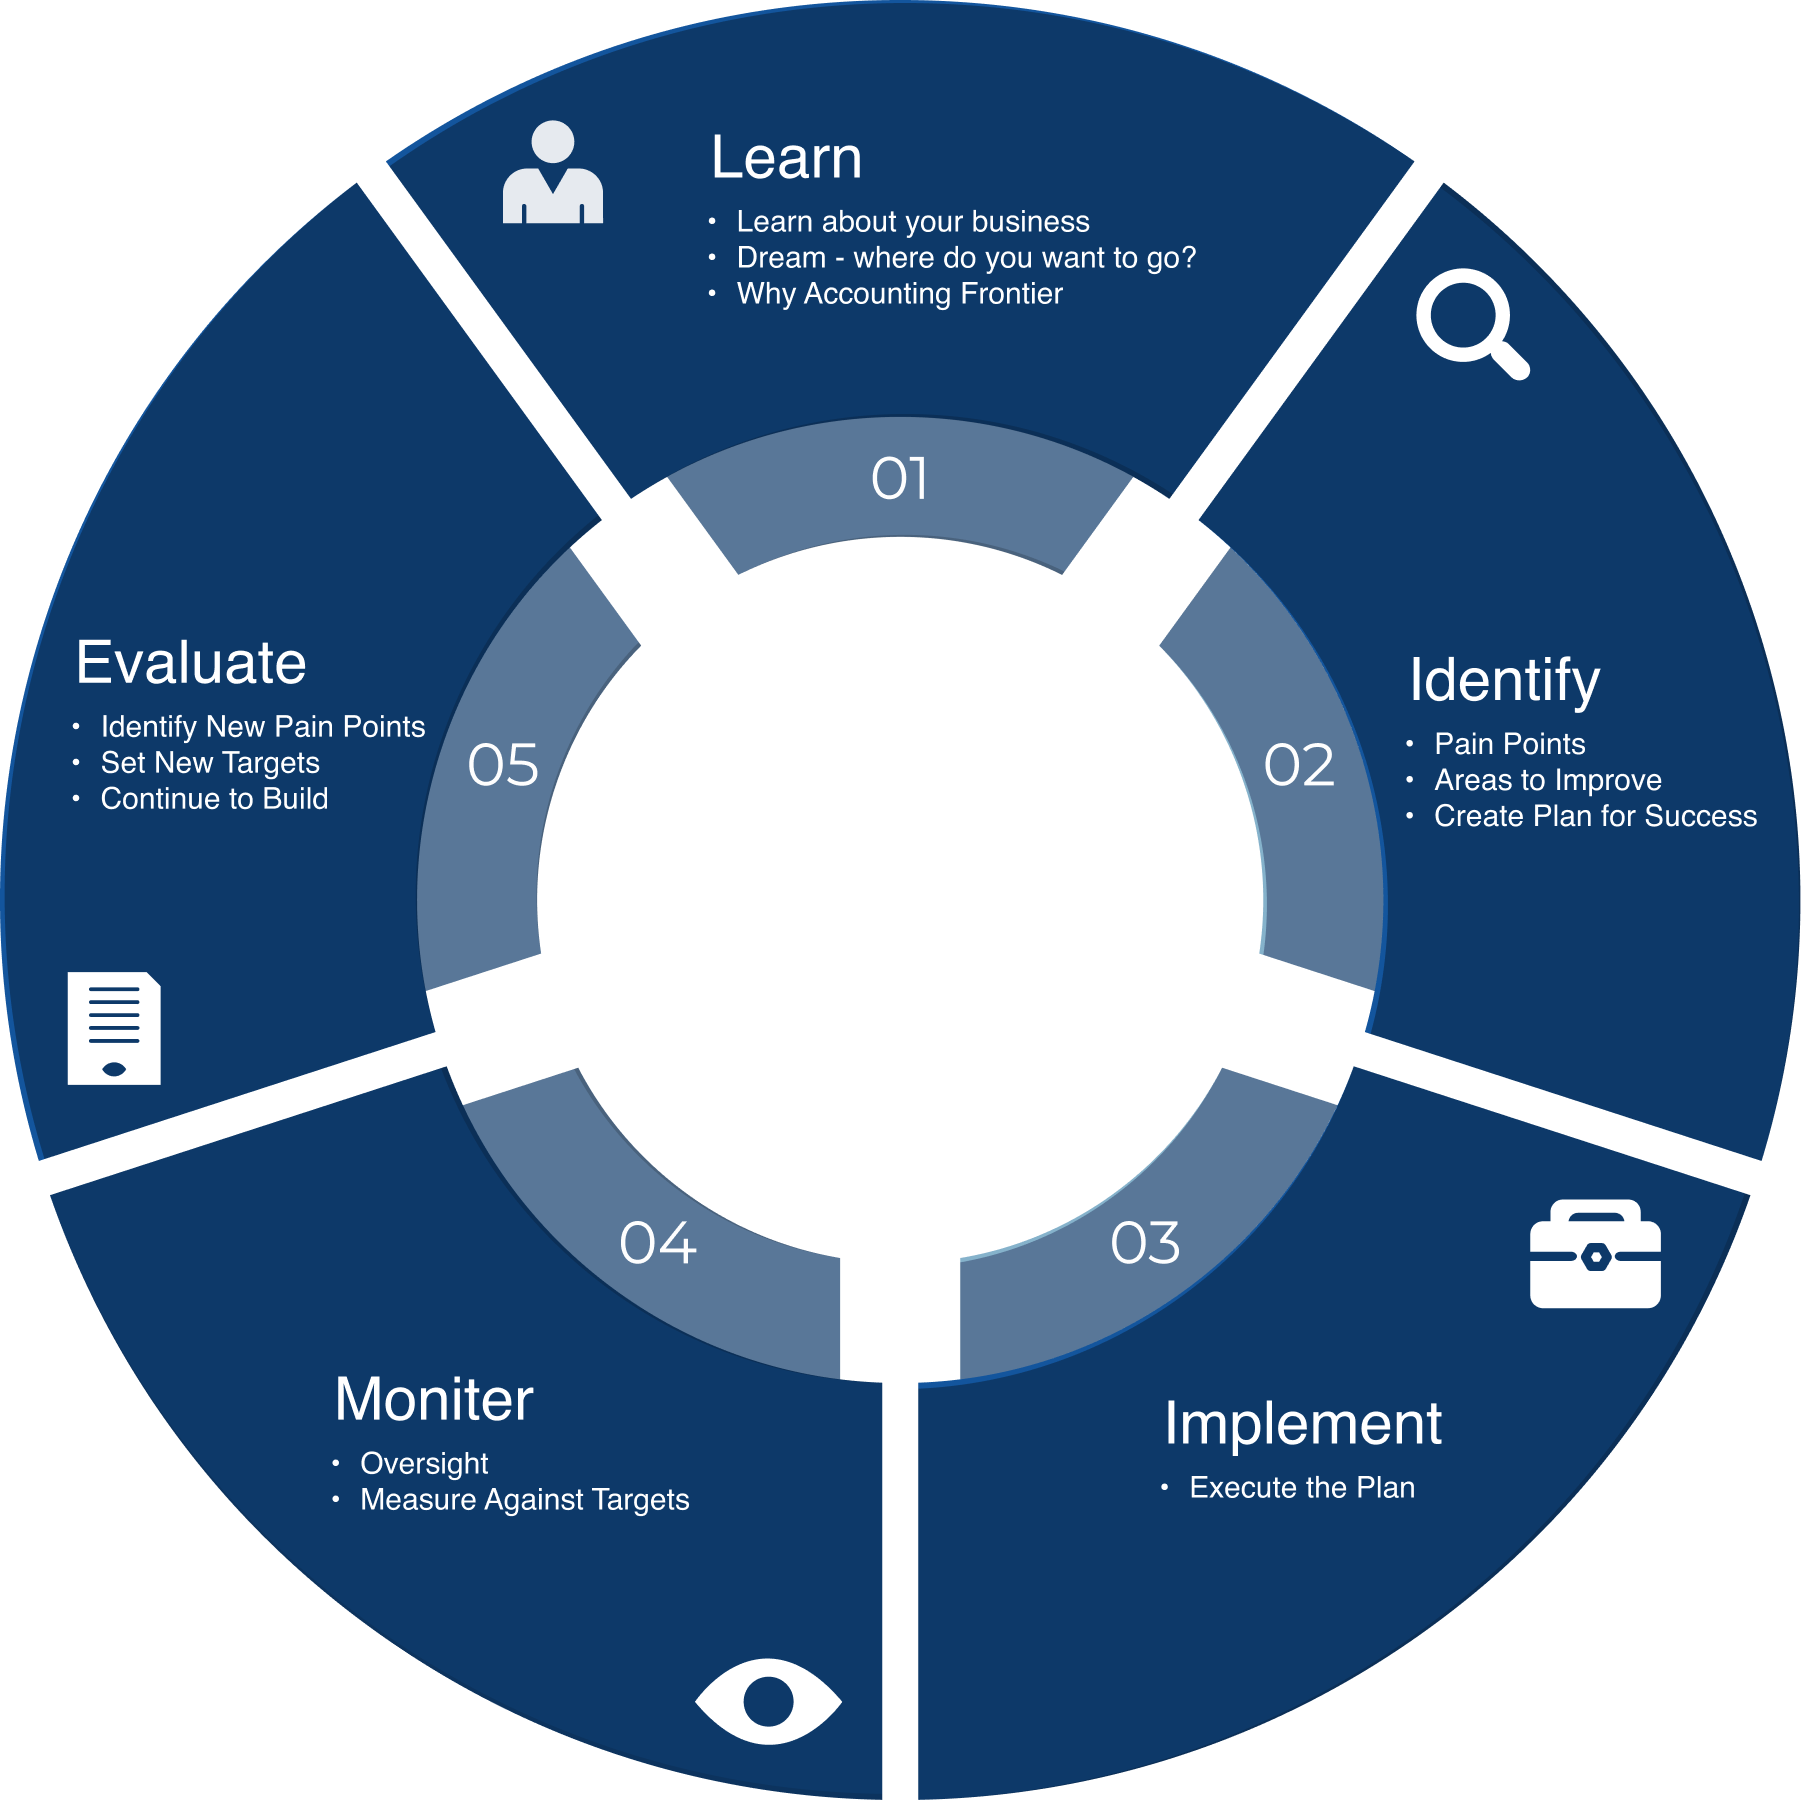 IMG - The Accounting Frontier Process - White